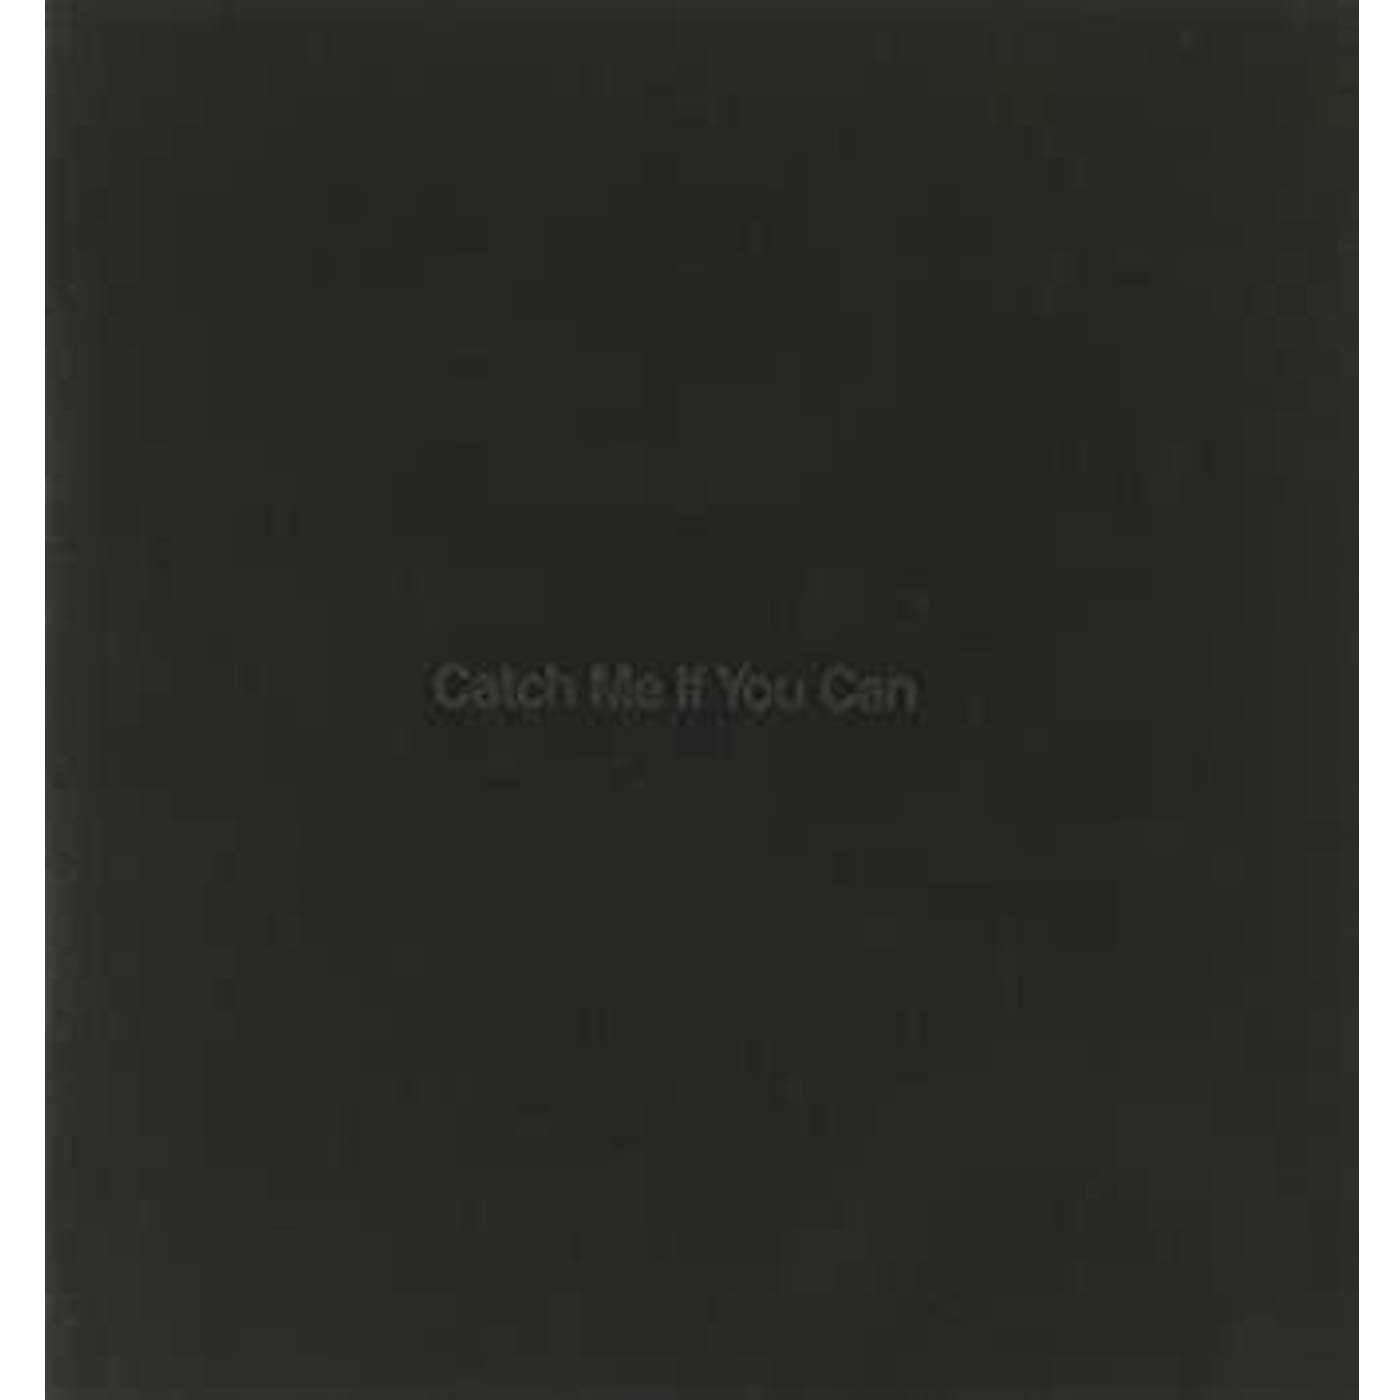 Girls' Generation CATCH ME IF YOU CAN (LIMITED) CD